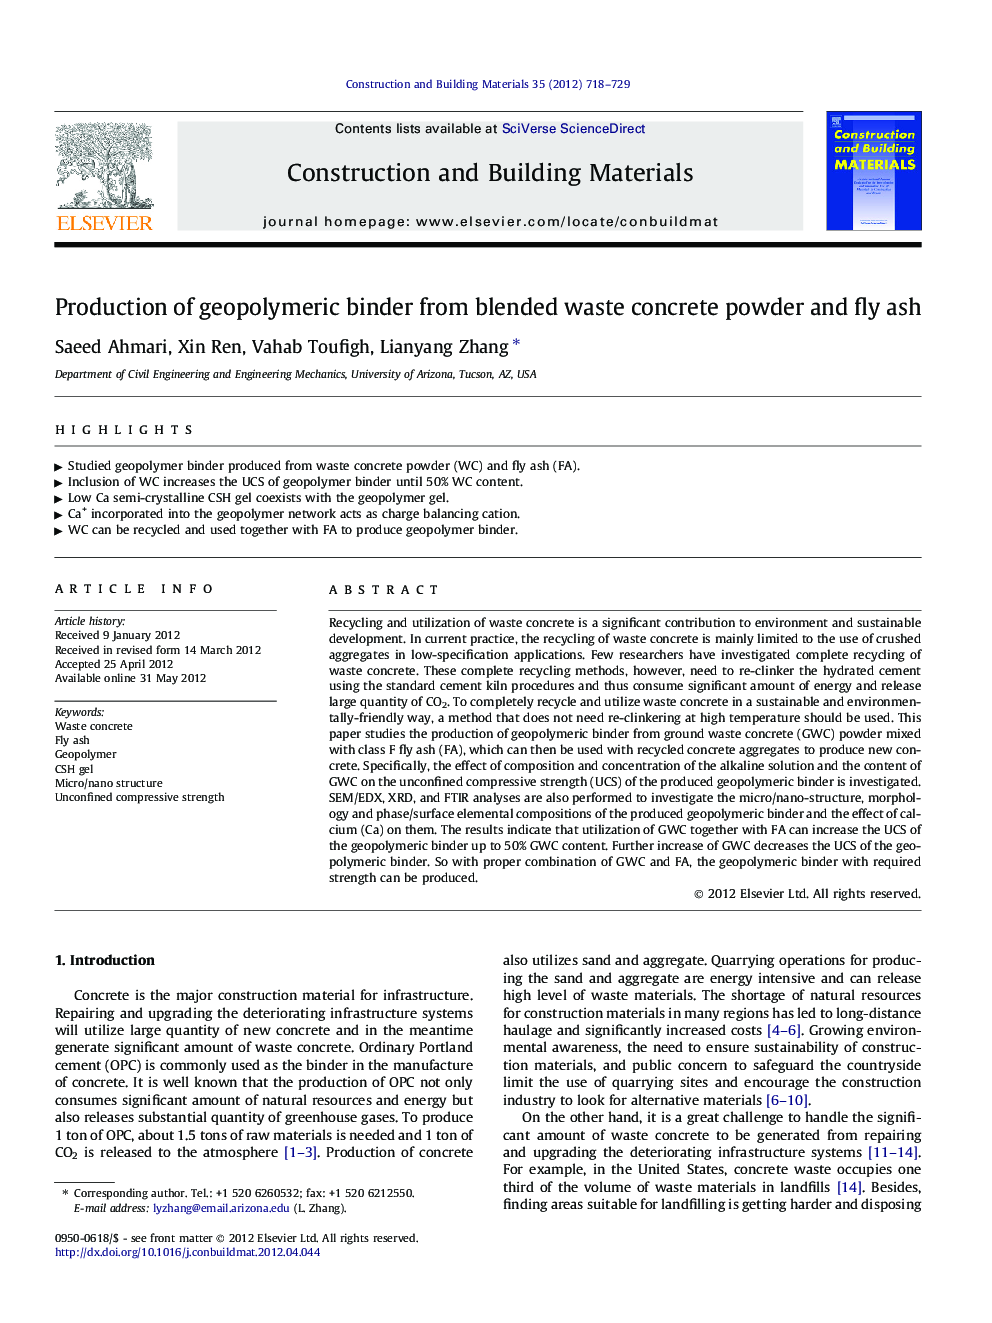 Production of geopolymeric binder from blended waste concrete powder and fly ash